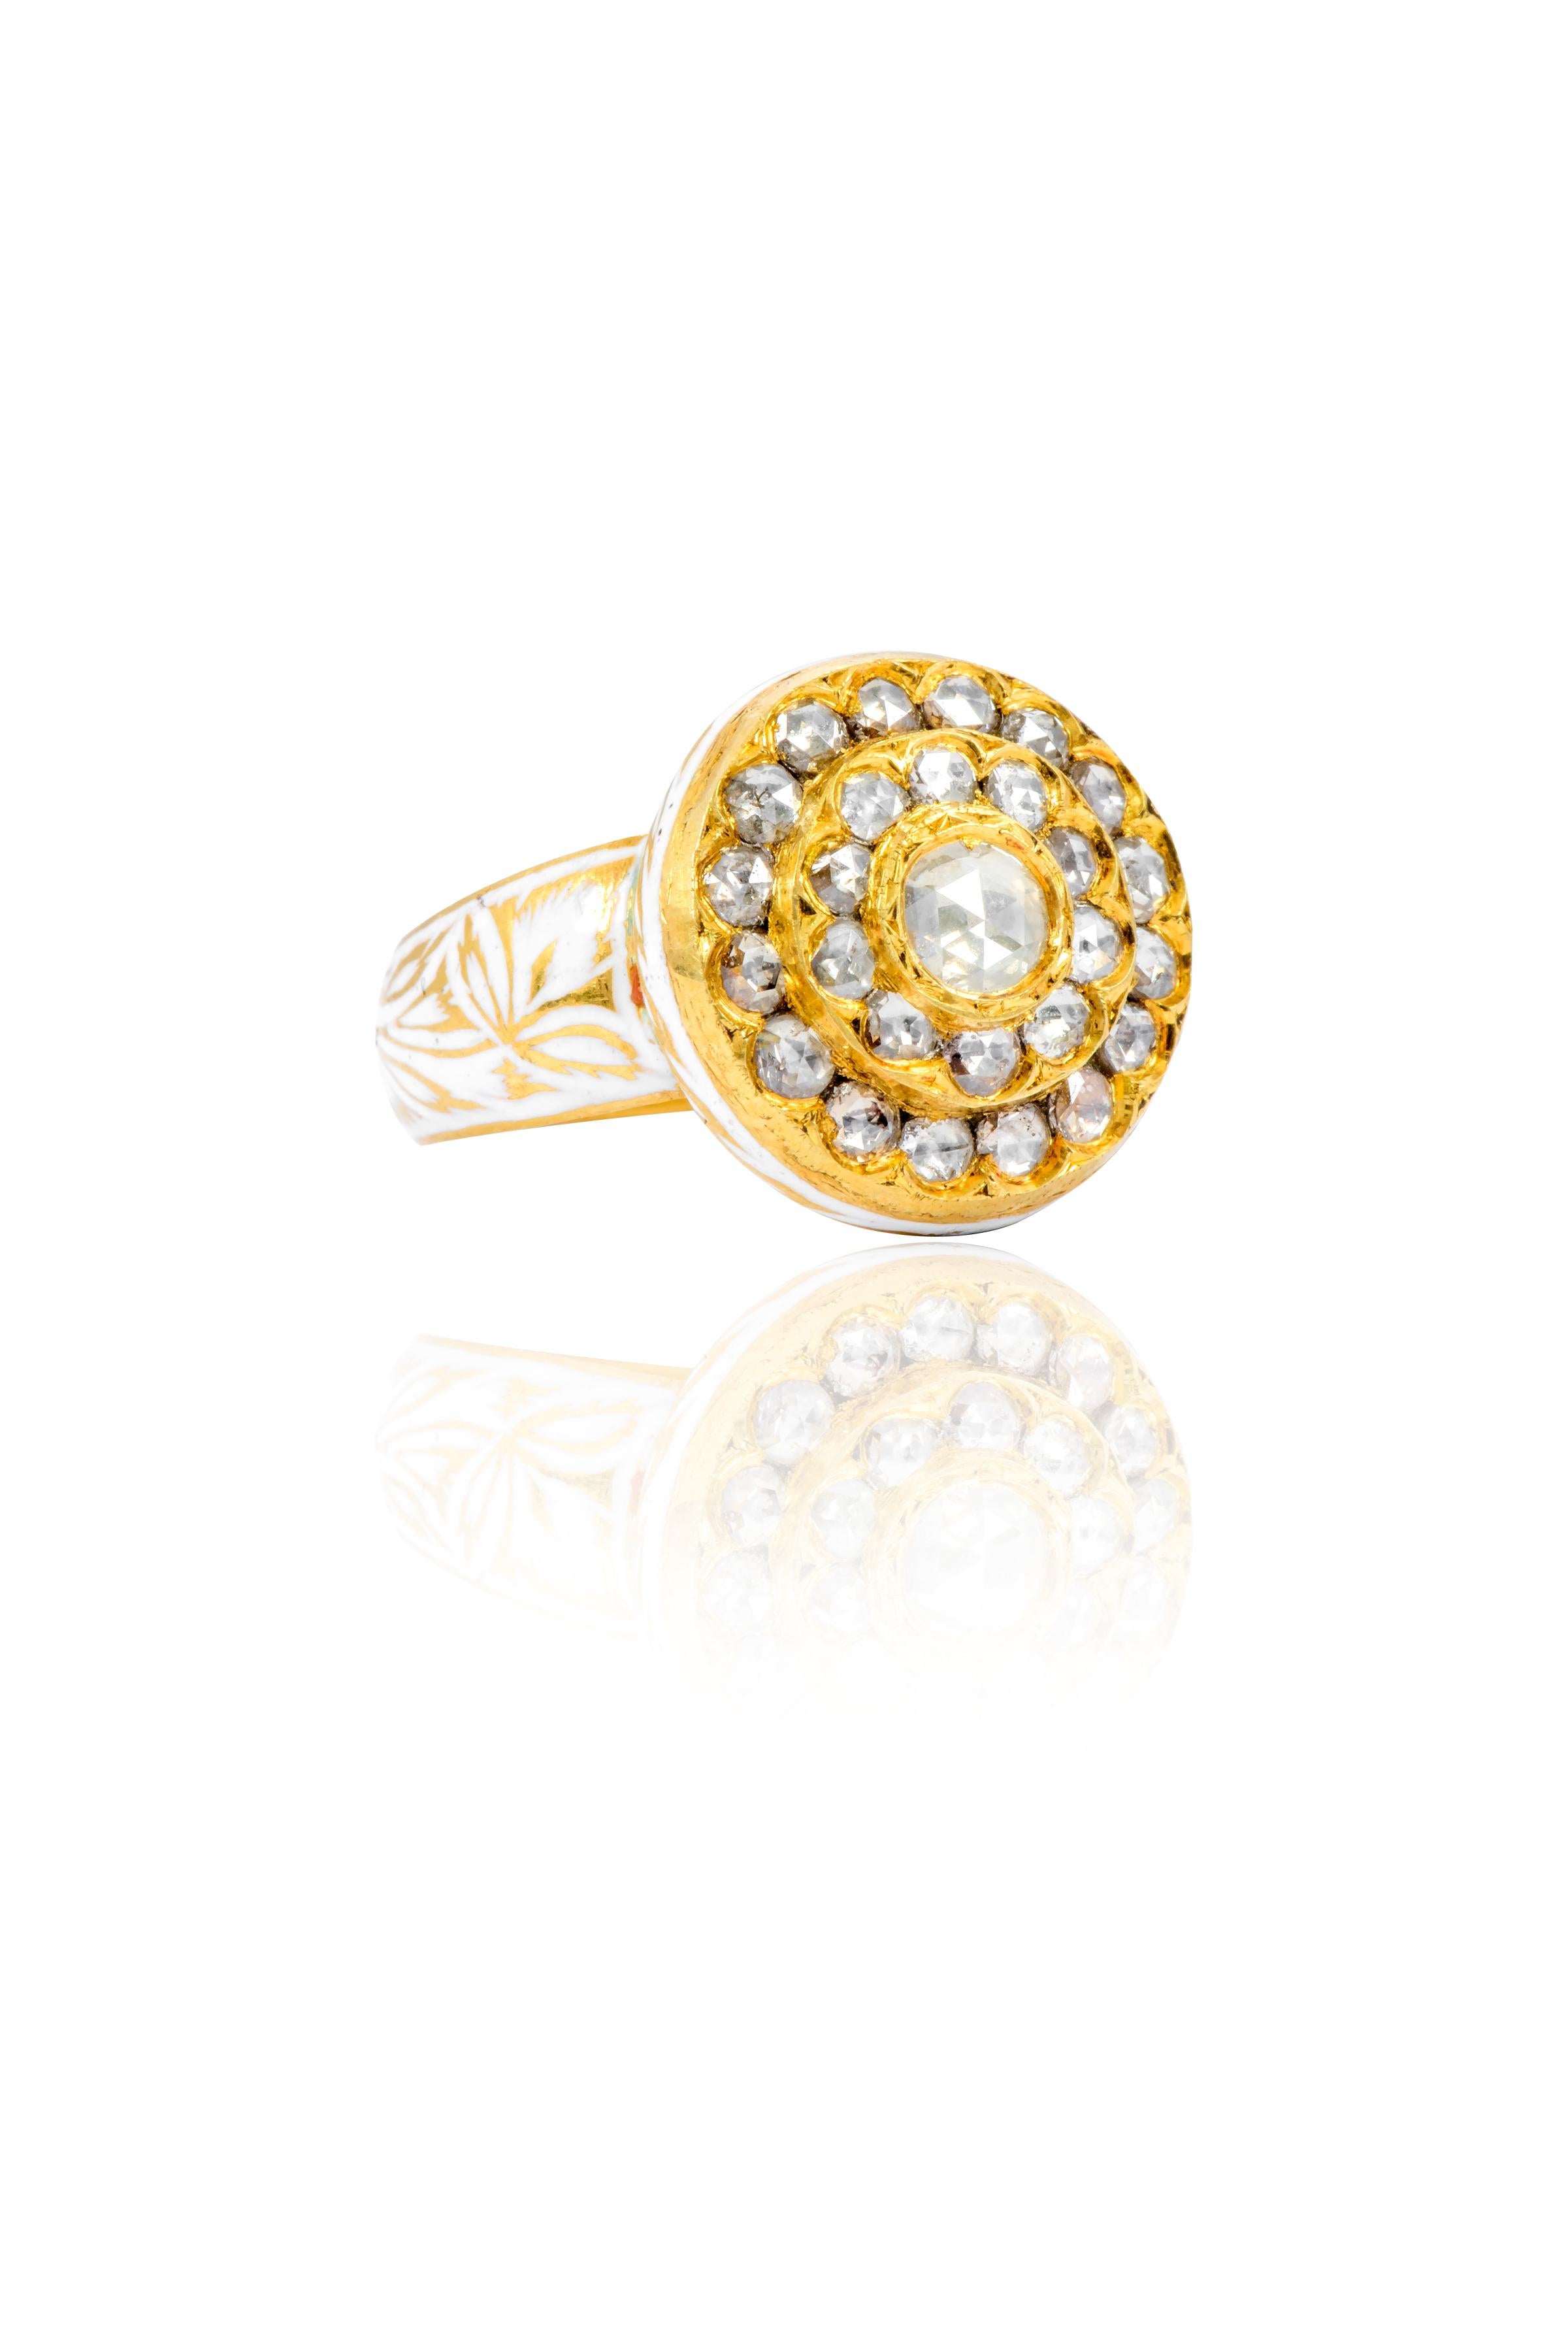 22 Karat Yellow Gold Rose-cut Diamond Ring with White Enamel Work Handcrafted

This ingenious Mughal era hand-made Polki diamond ring with white enamel is breath-taking. The solitaire round diamond Polki in the center is surrounded by two complete